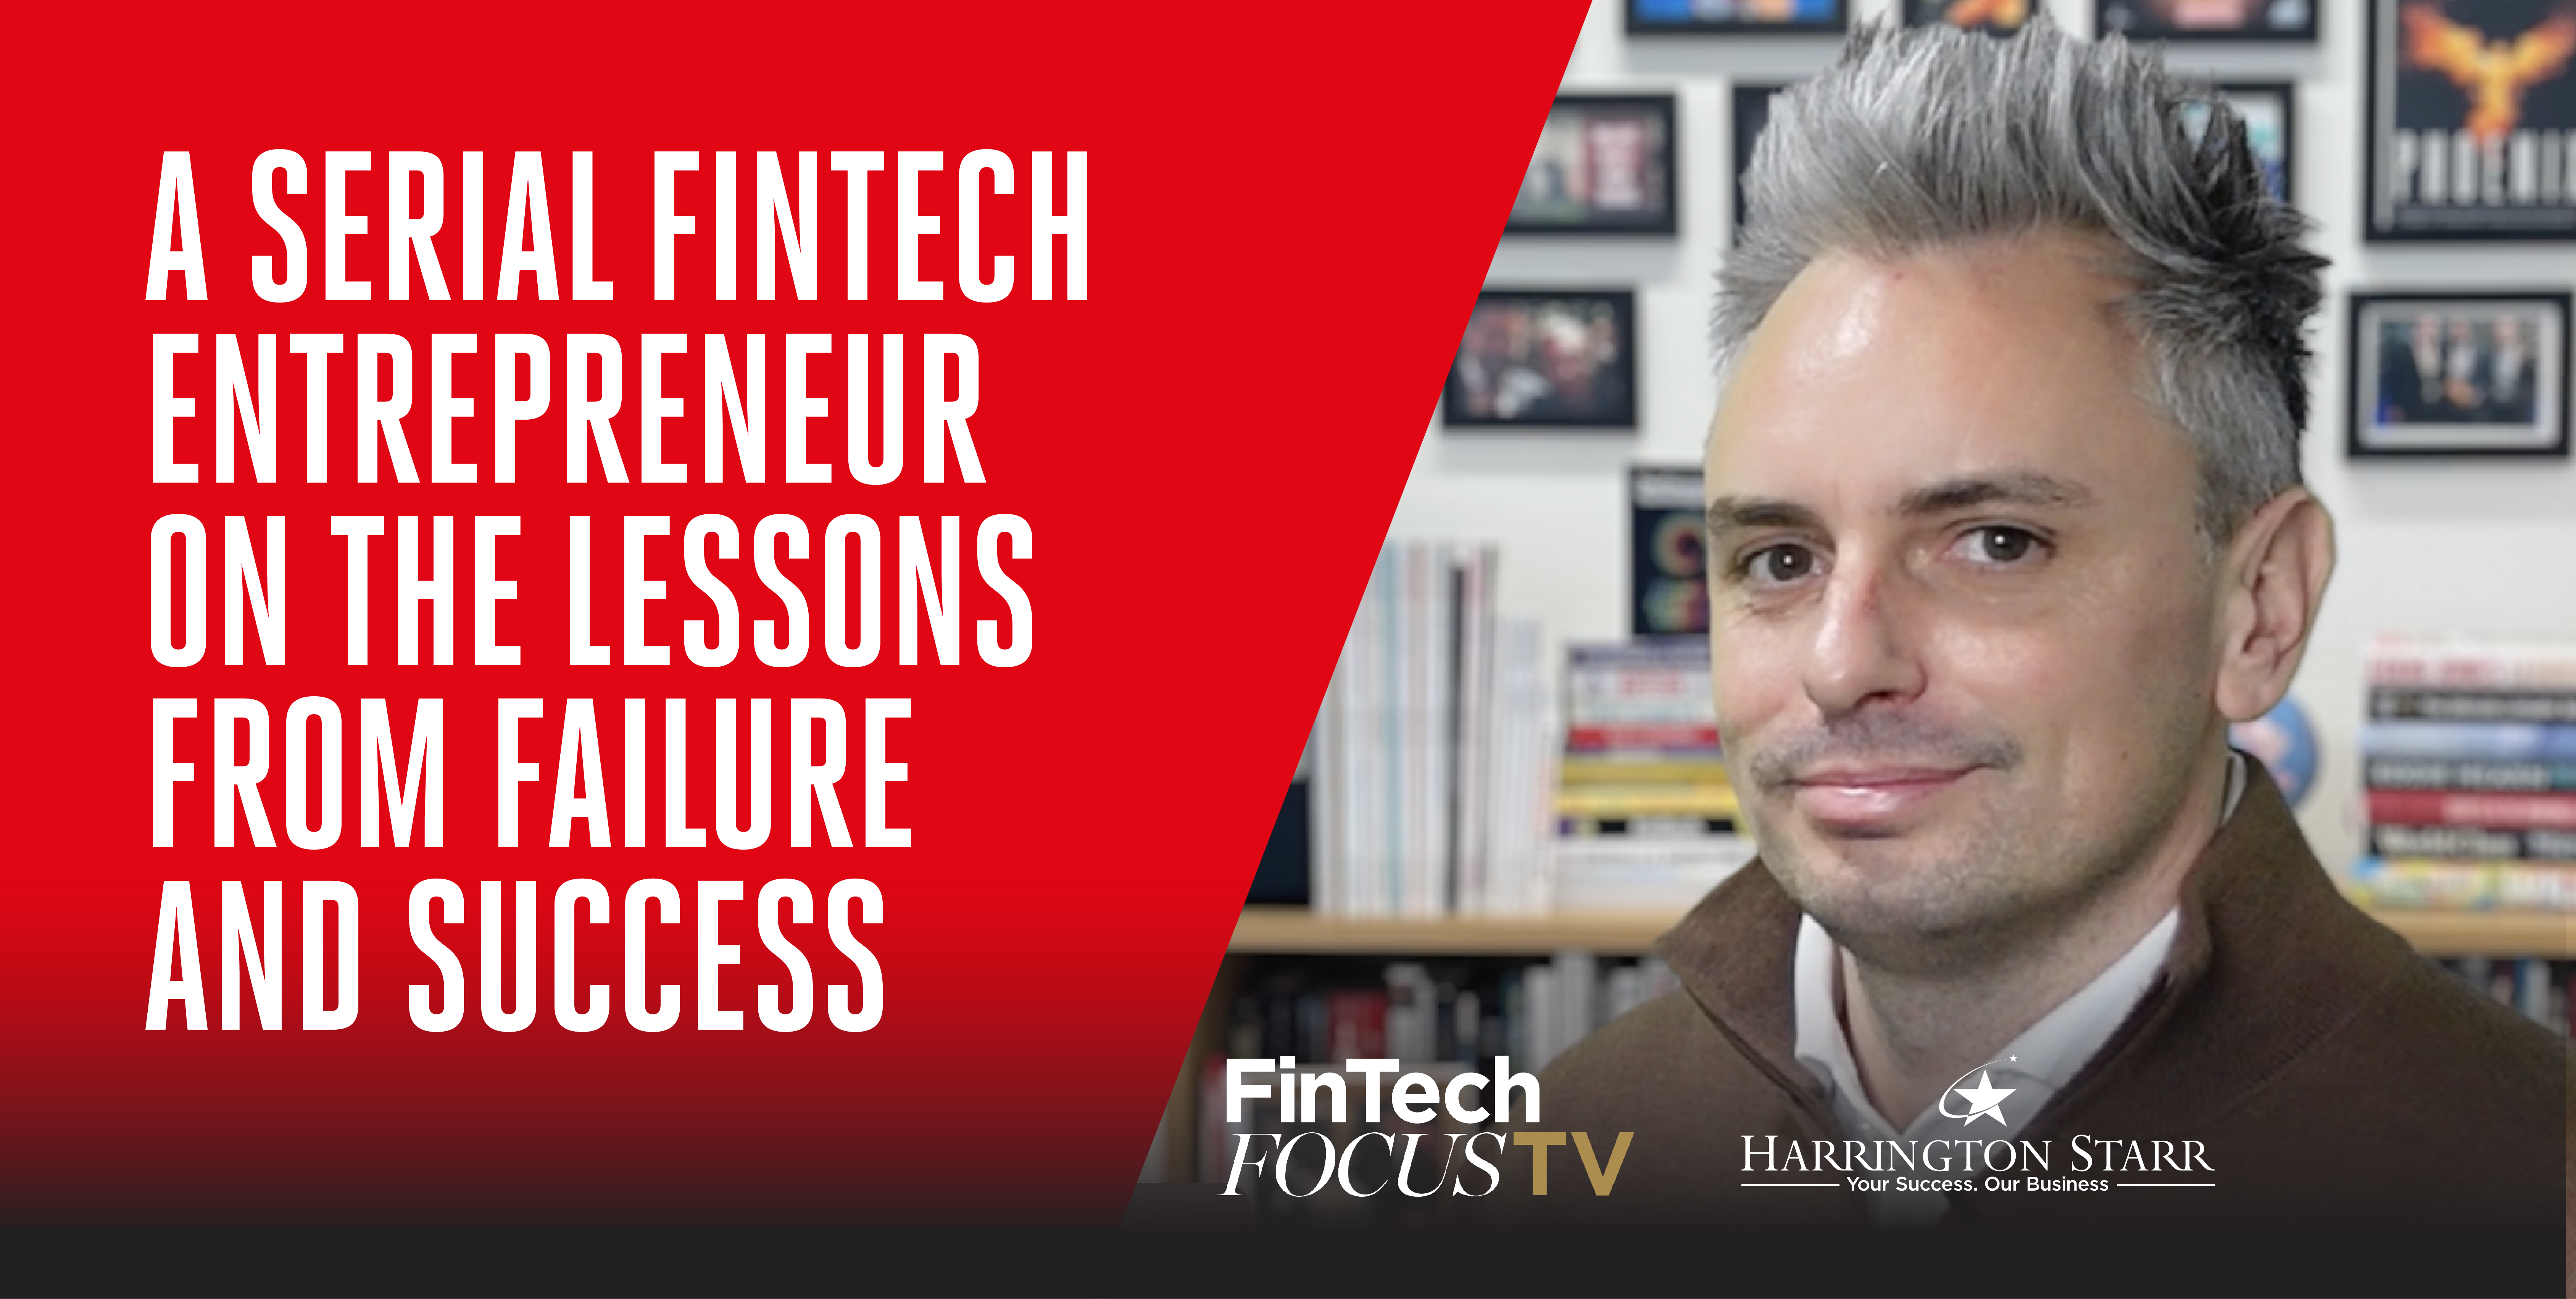 A Serial Fintech Entrepreneur on the Lessons from Failure and Success